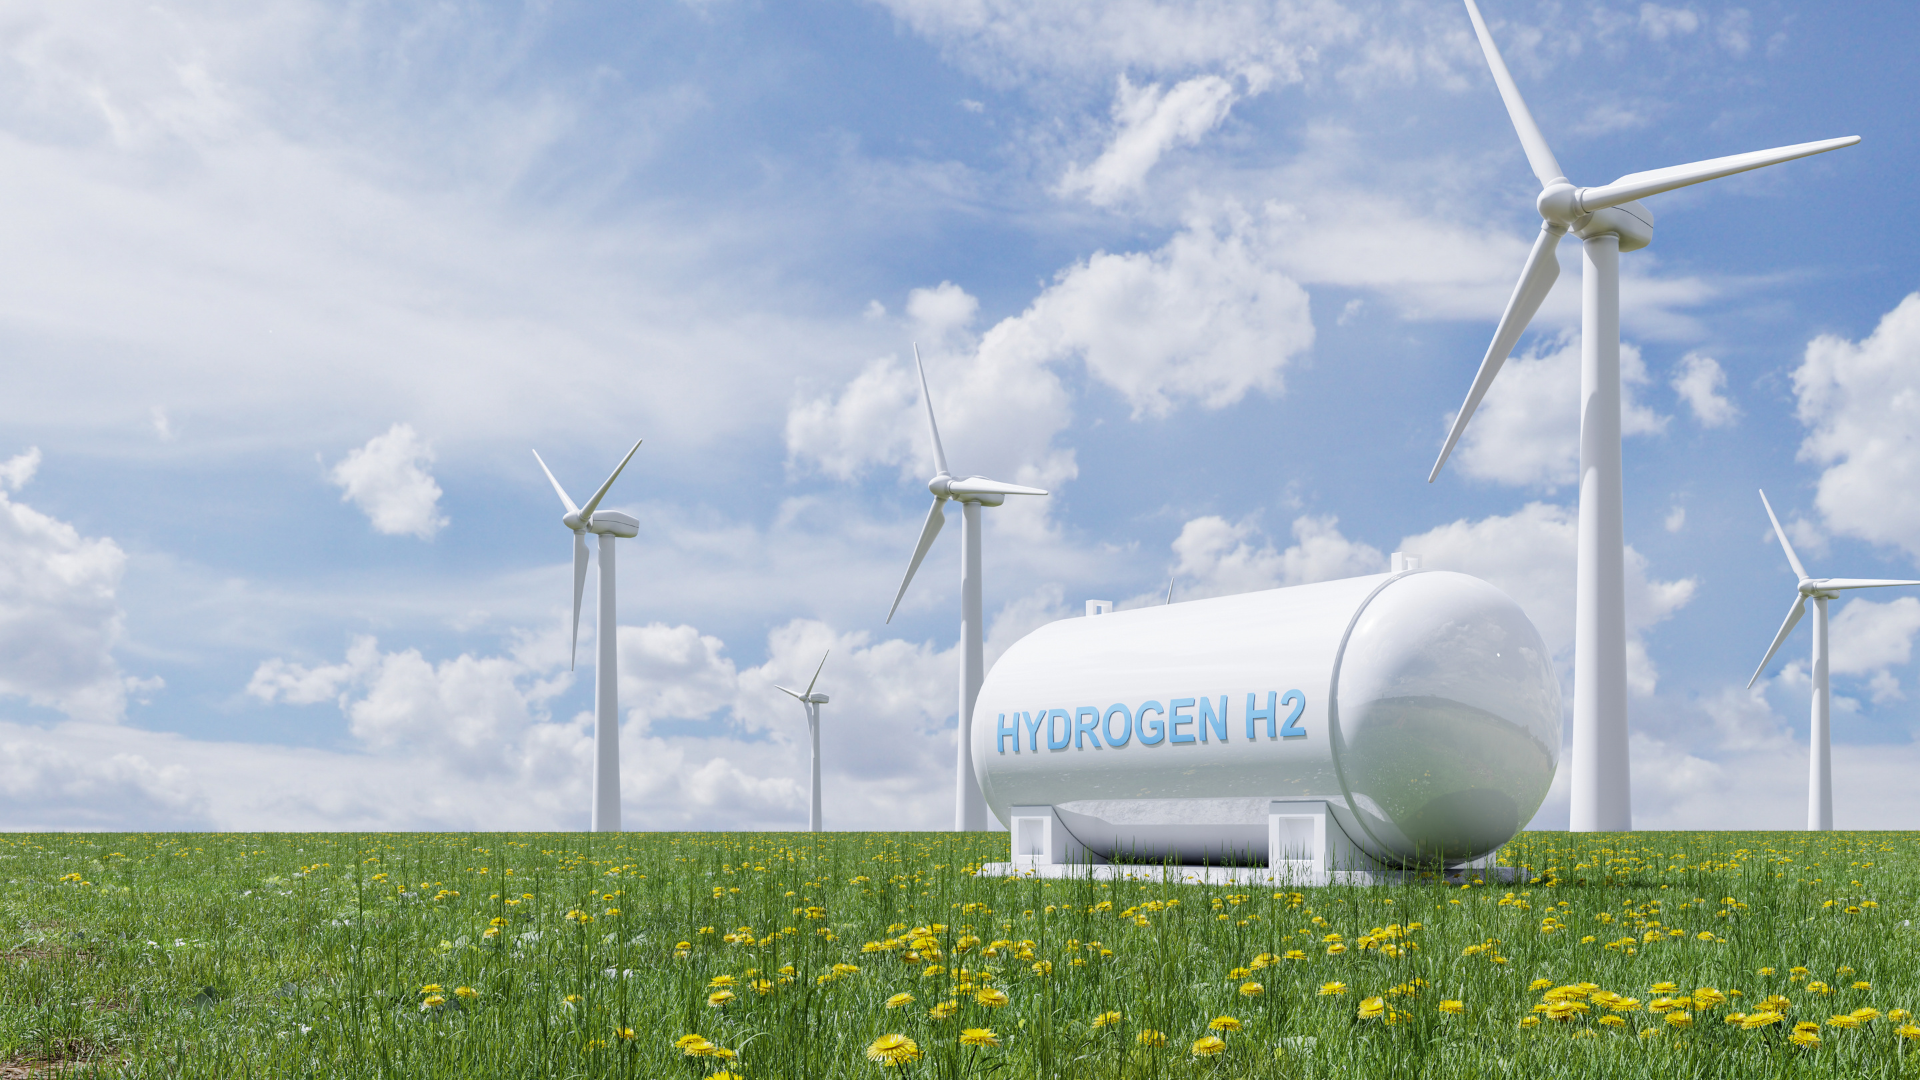 Hydrogen energy storage with wind turbines [image courtesy of Canva]